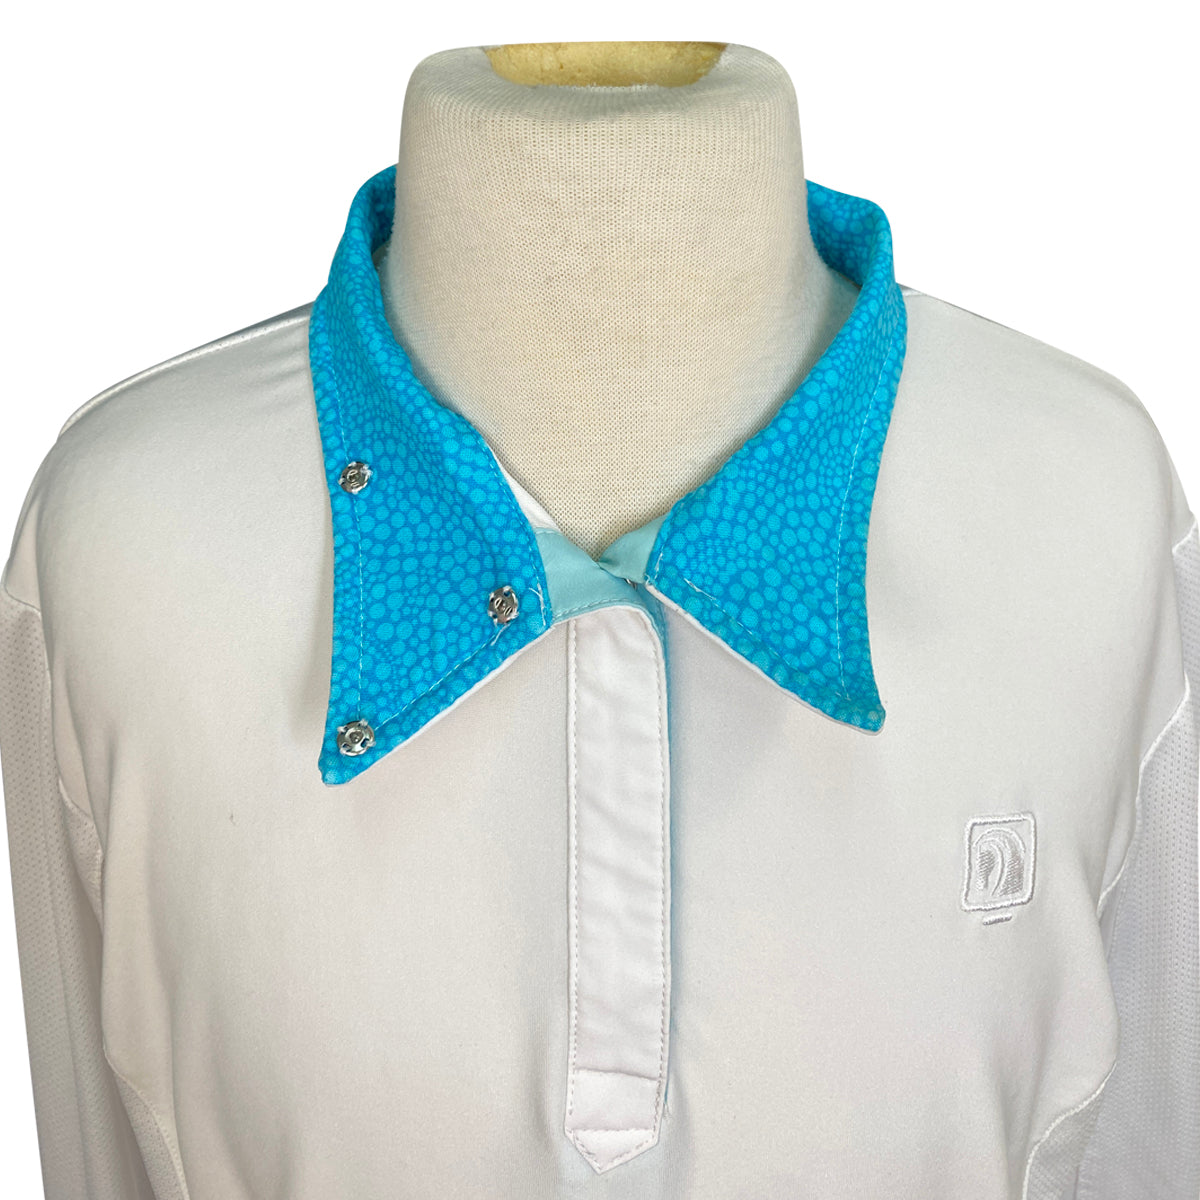 Romfh &#39;Lindsay&#39; Chill Factor Show Shirt in White w/Blue Bubbles